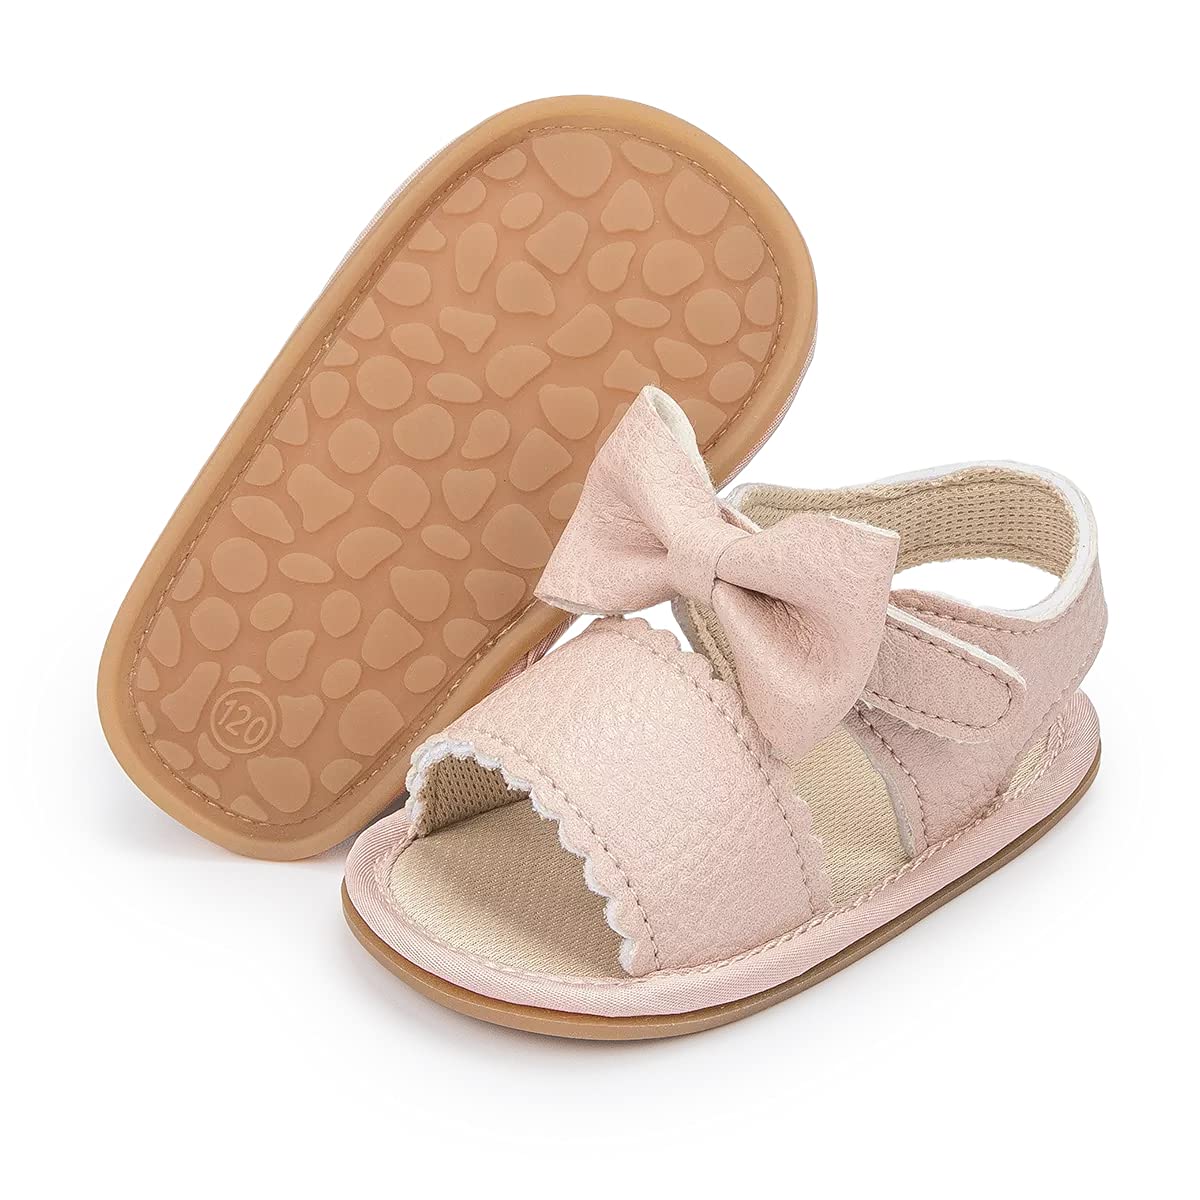 Sabe Summer Infant Baby Girls Sandals Striped Bowknot Soft Rubber Sole  First Walker Shoes : Amazon.in: Shoes & Handbags